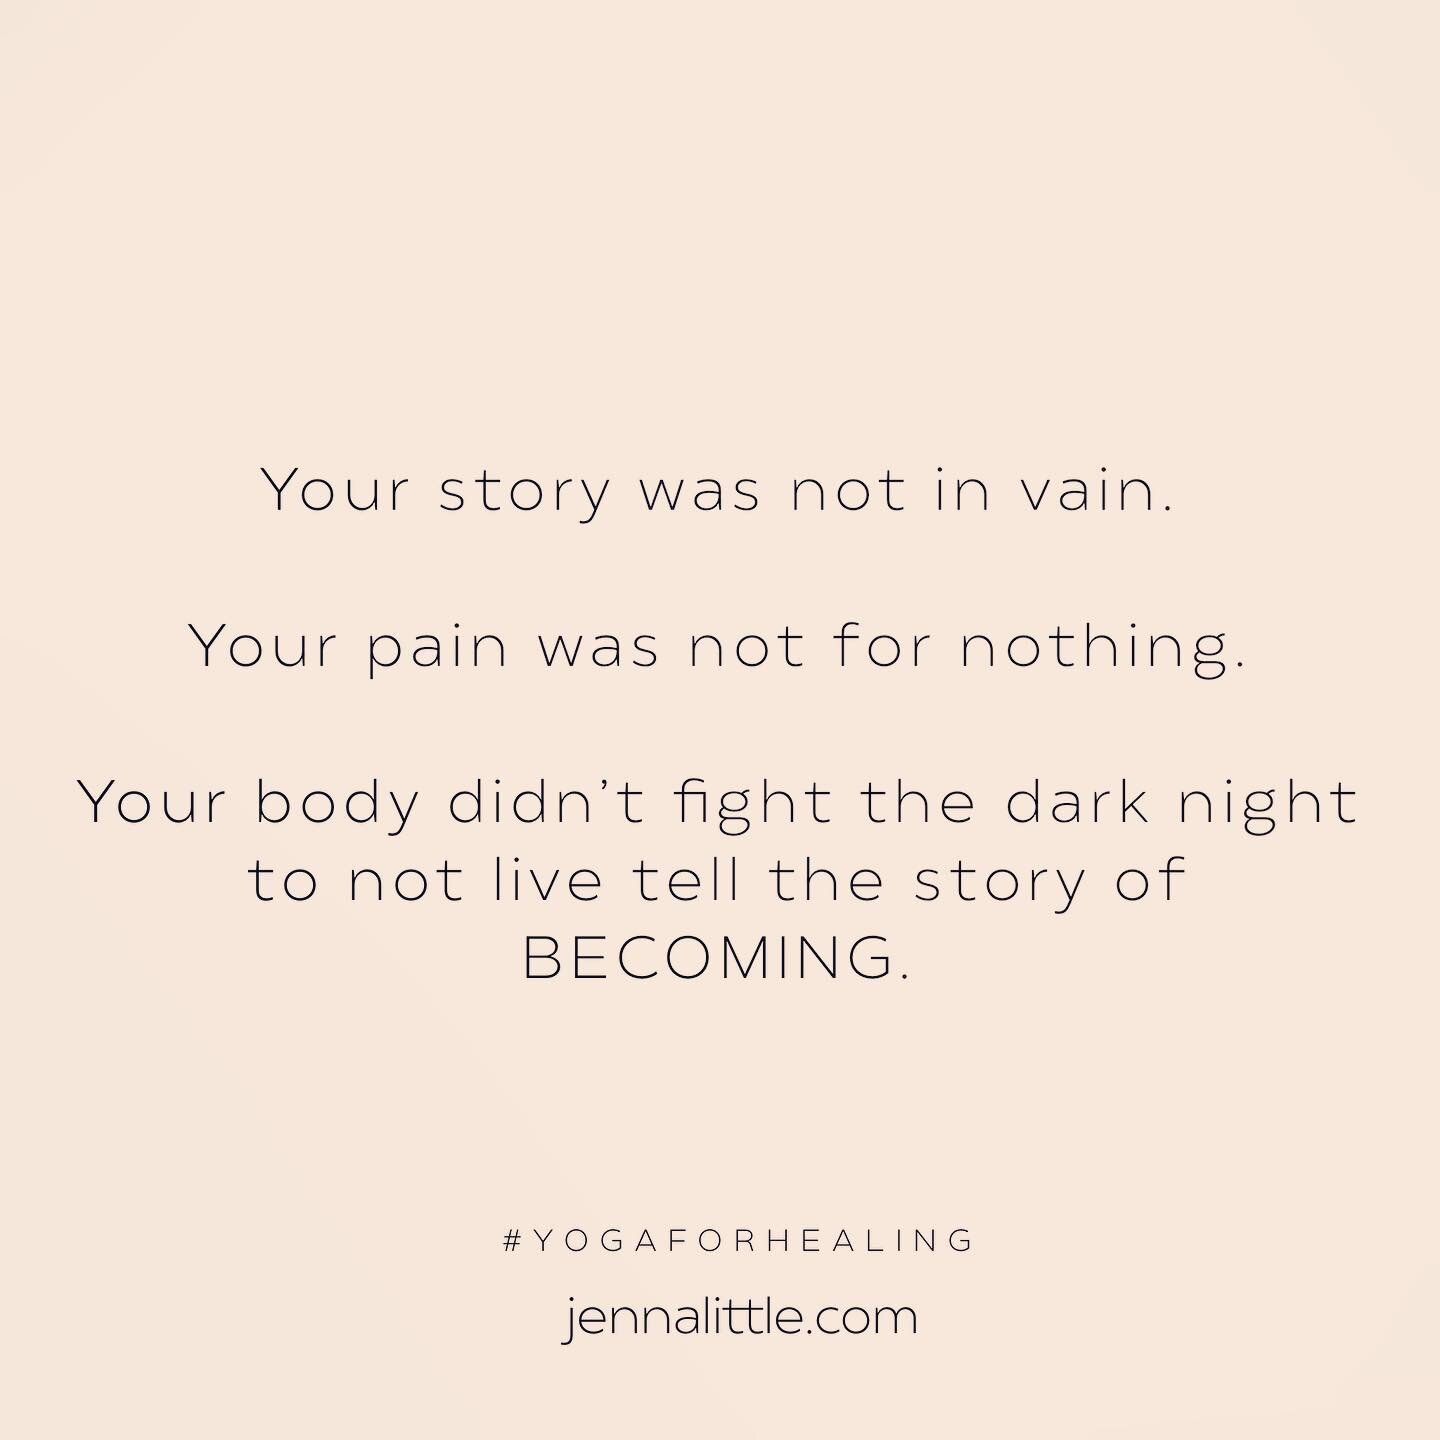 When we break our silence about our story to ourselves...

We start shifting both internally and externally.

Did you know that you have a seat of truth in your body that will tell you when it&rsquo;s been silenced, dismissed, or controlled? It will 